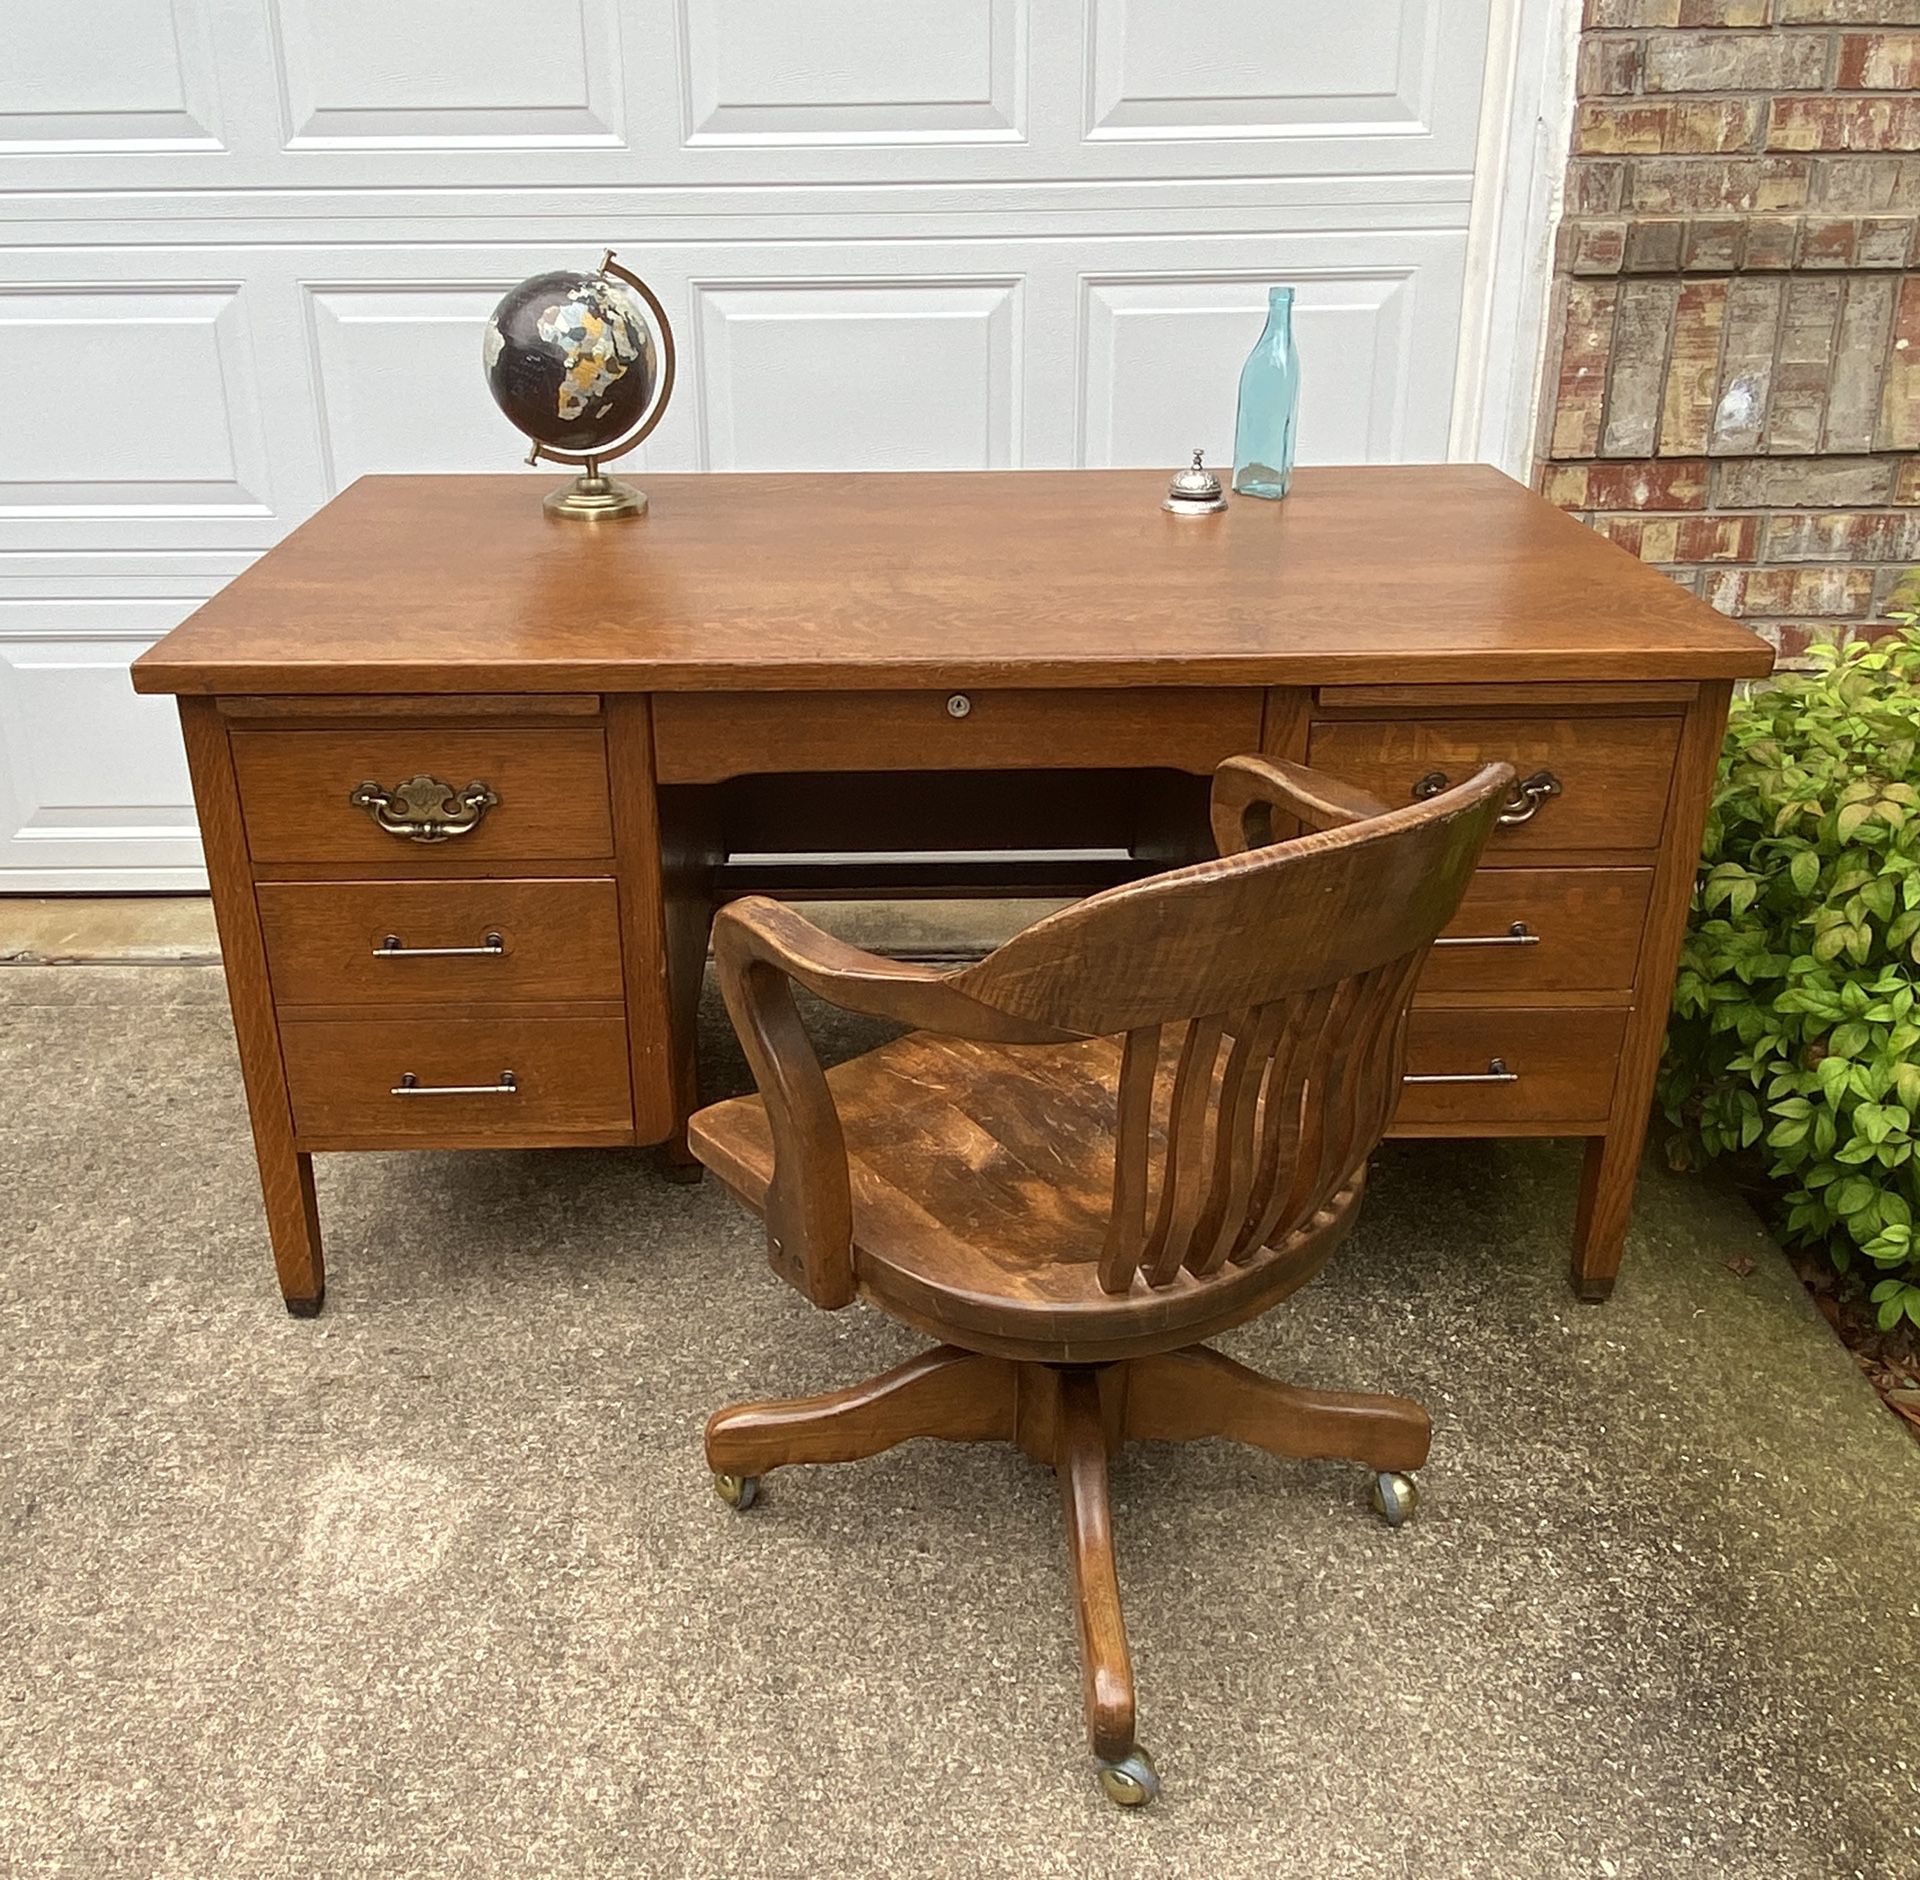 Vintage heavy duty wood desk and rolling chair